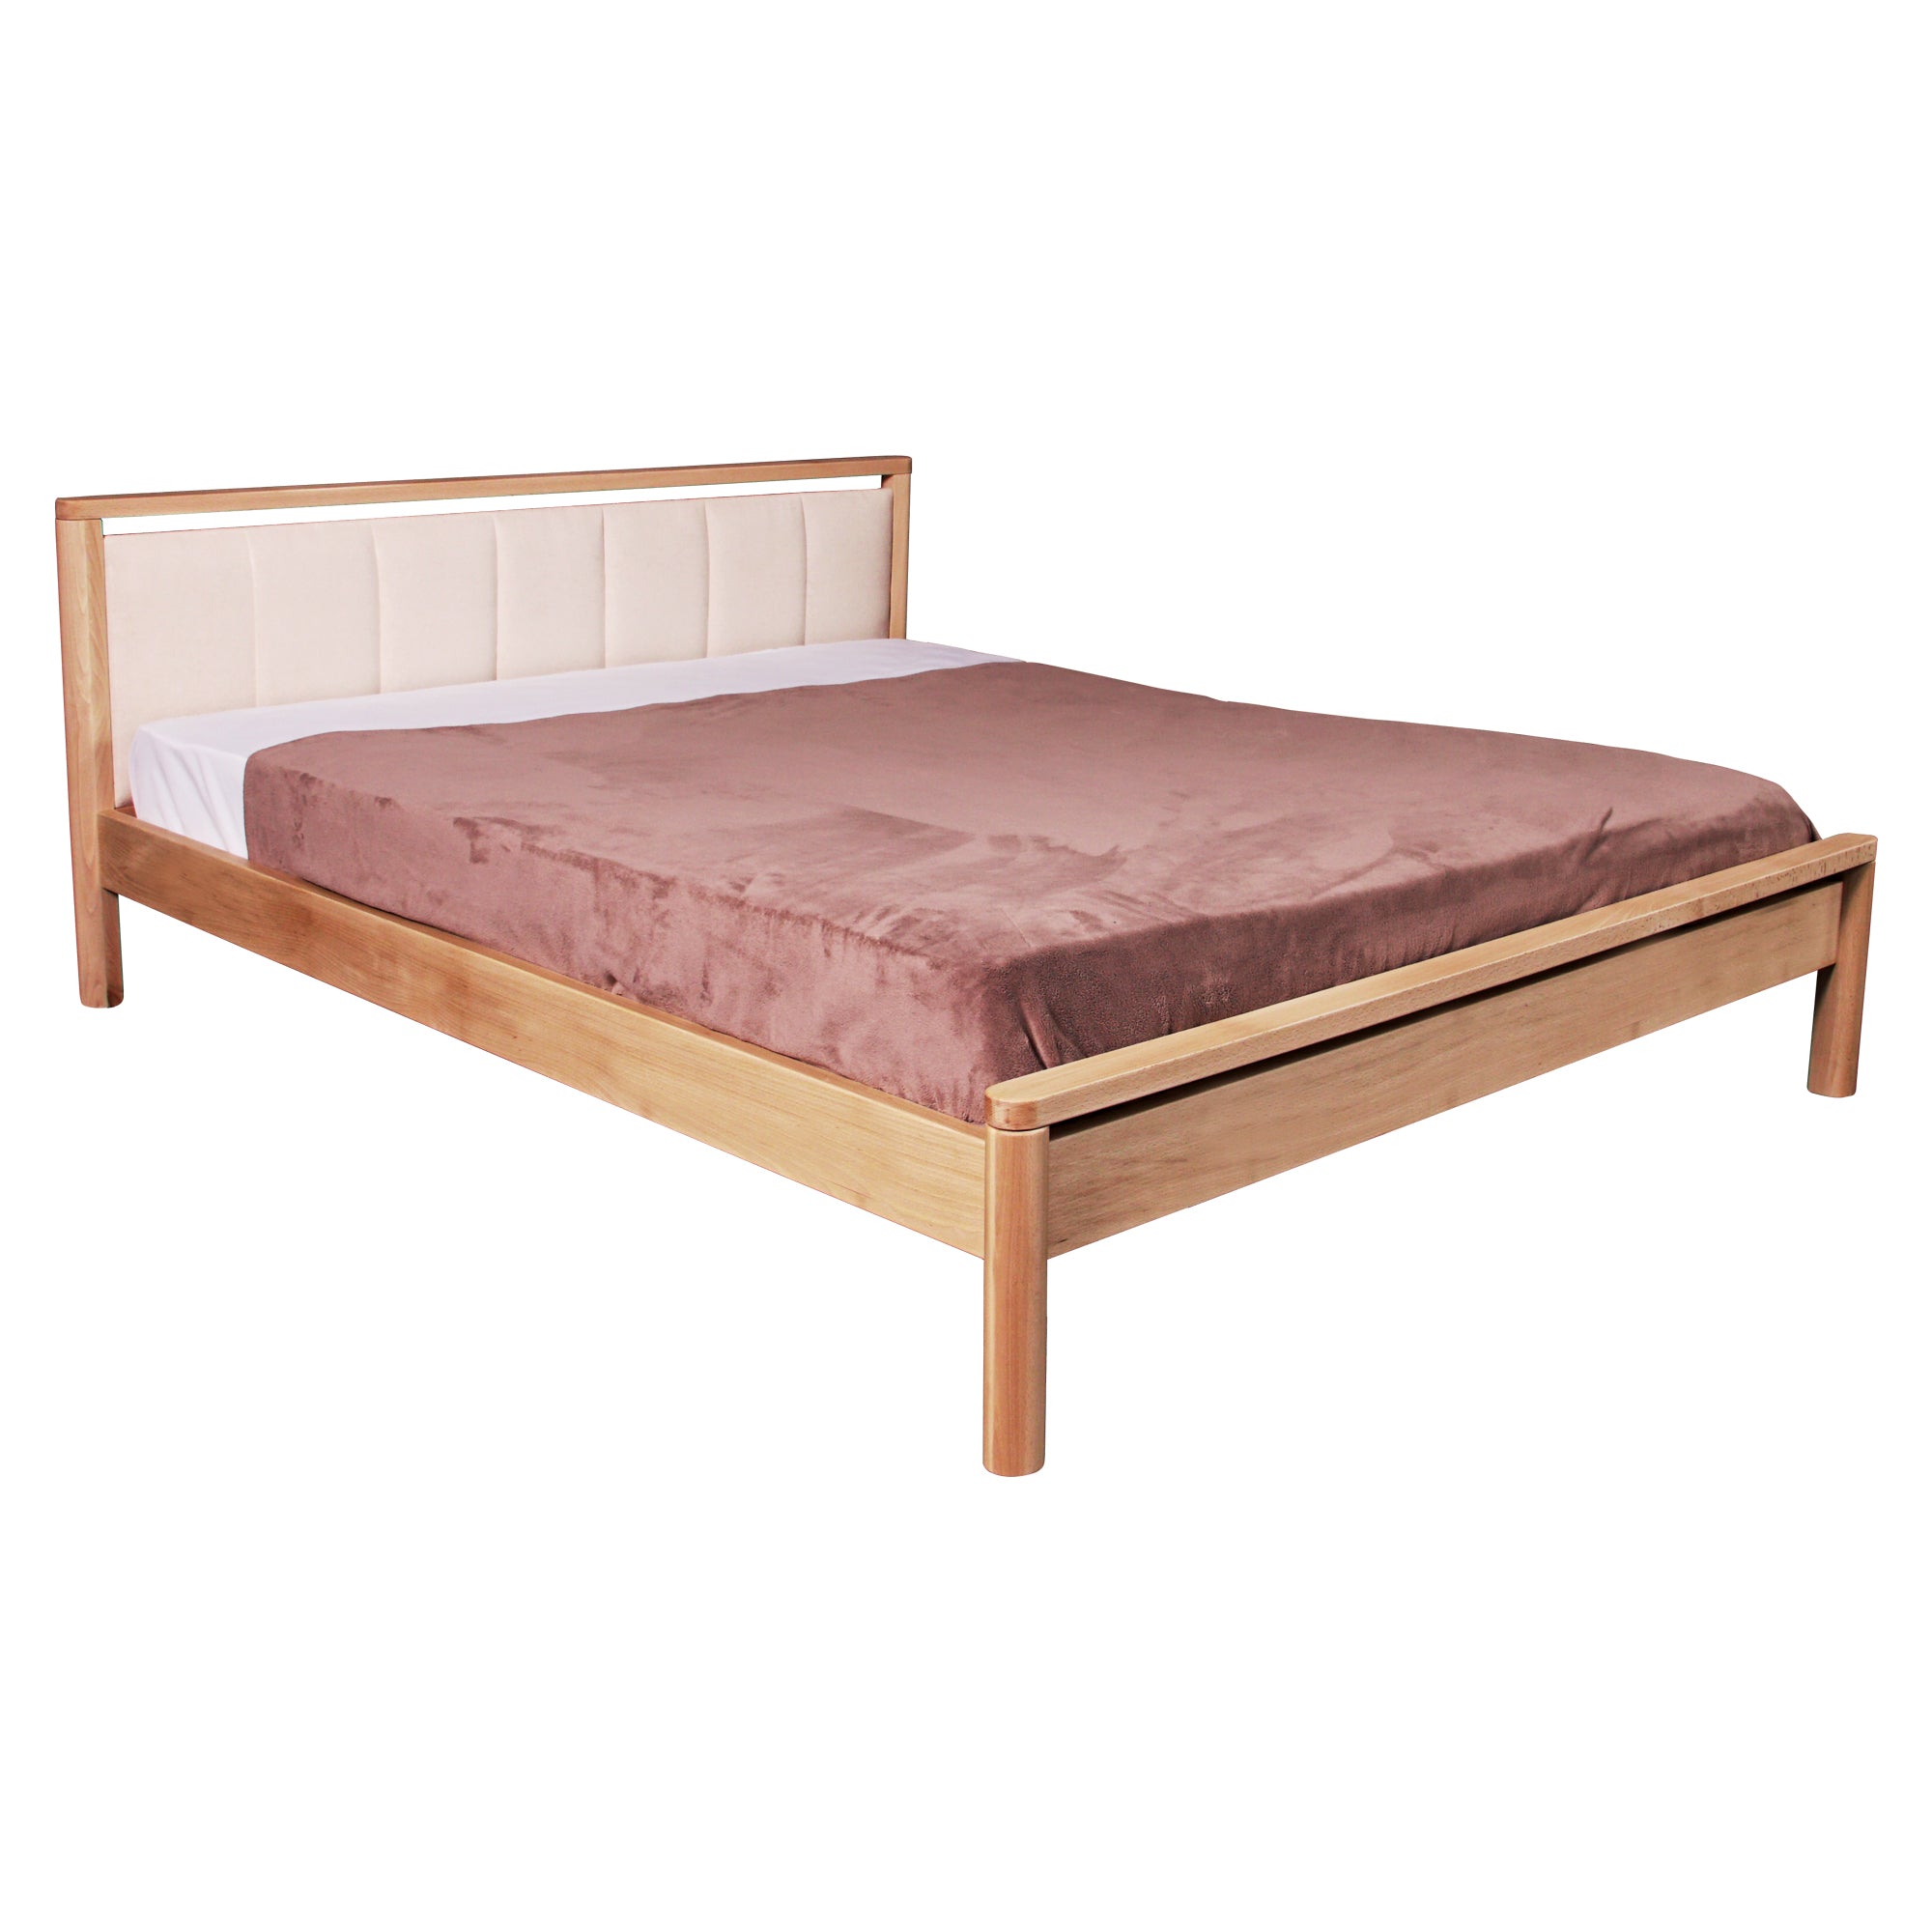 DROP SOFT Double Bed, Beech Wood with Upholstered Headboard